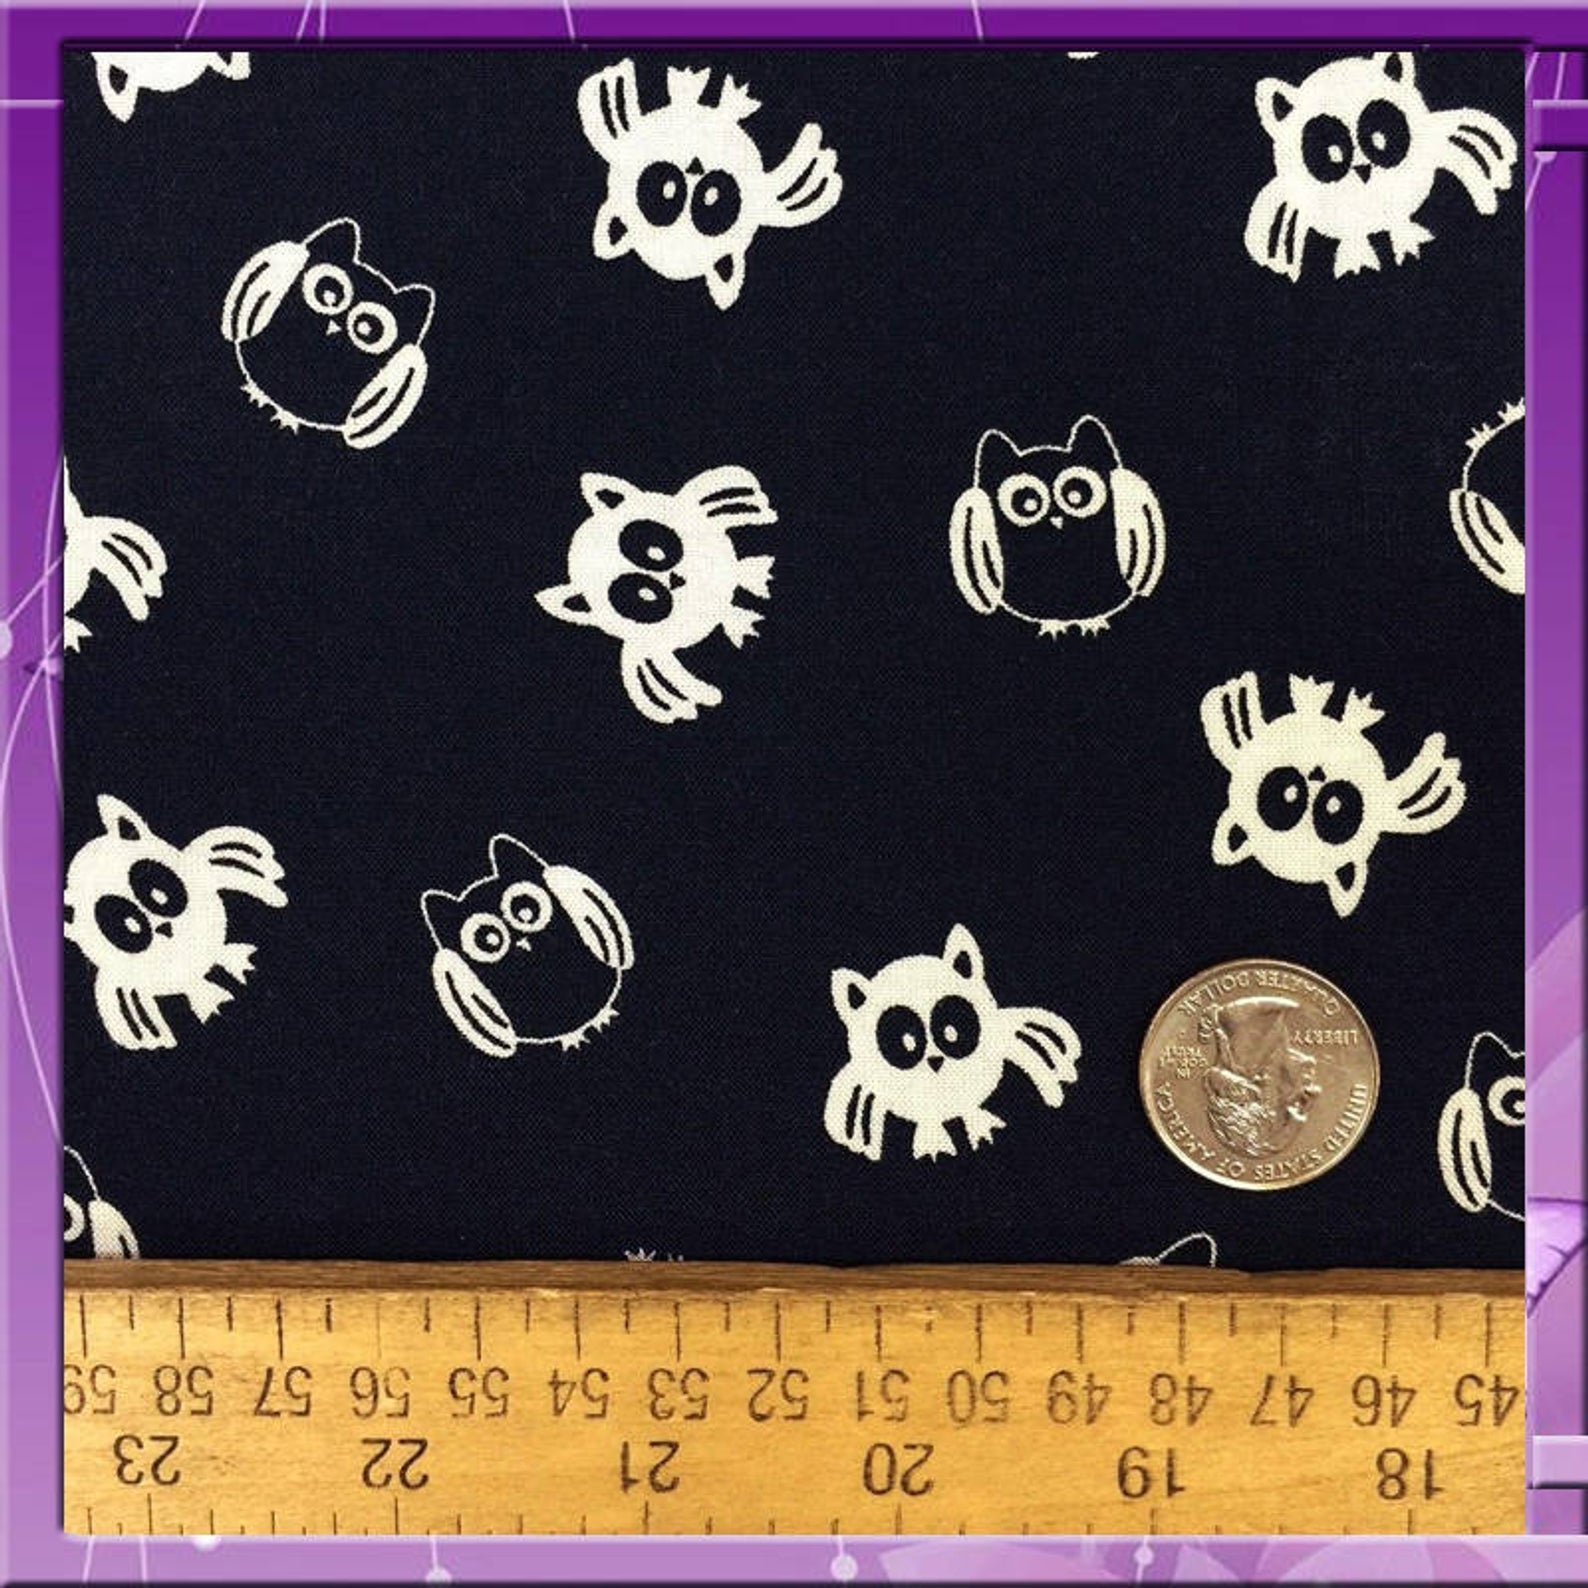 Rayon challis WHAT A HOOT owls on navy blue background 58 inches wide fabric sold by the yard soft organic fabric kidsICE FABRICSICE FABRICS1Rayon challis WHAT A HOOT owls on navy blue background 58 inches wide fabric sold by the yard soft organic fabric kids ICE FABRICS